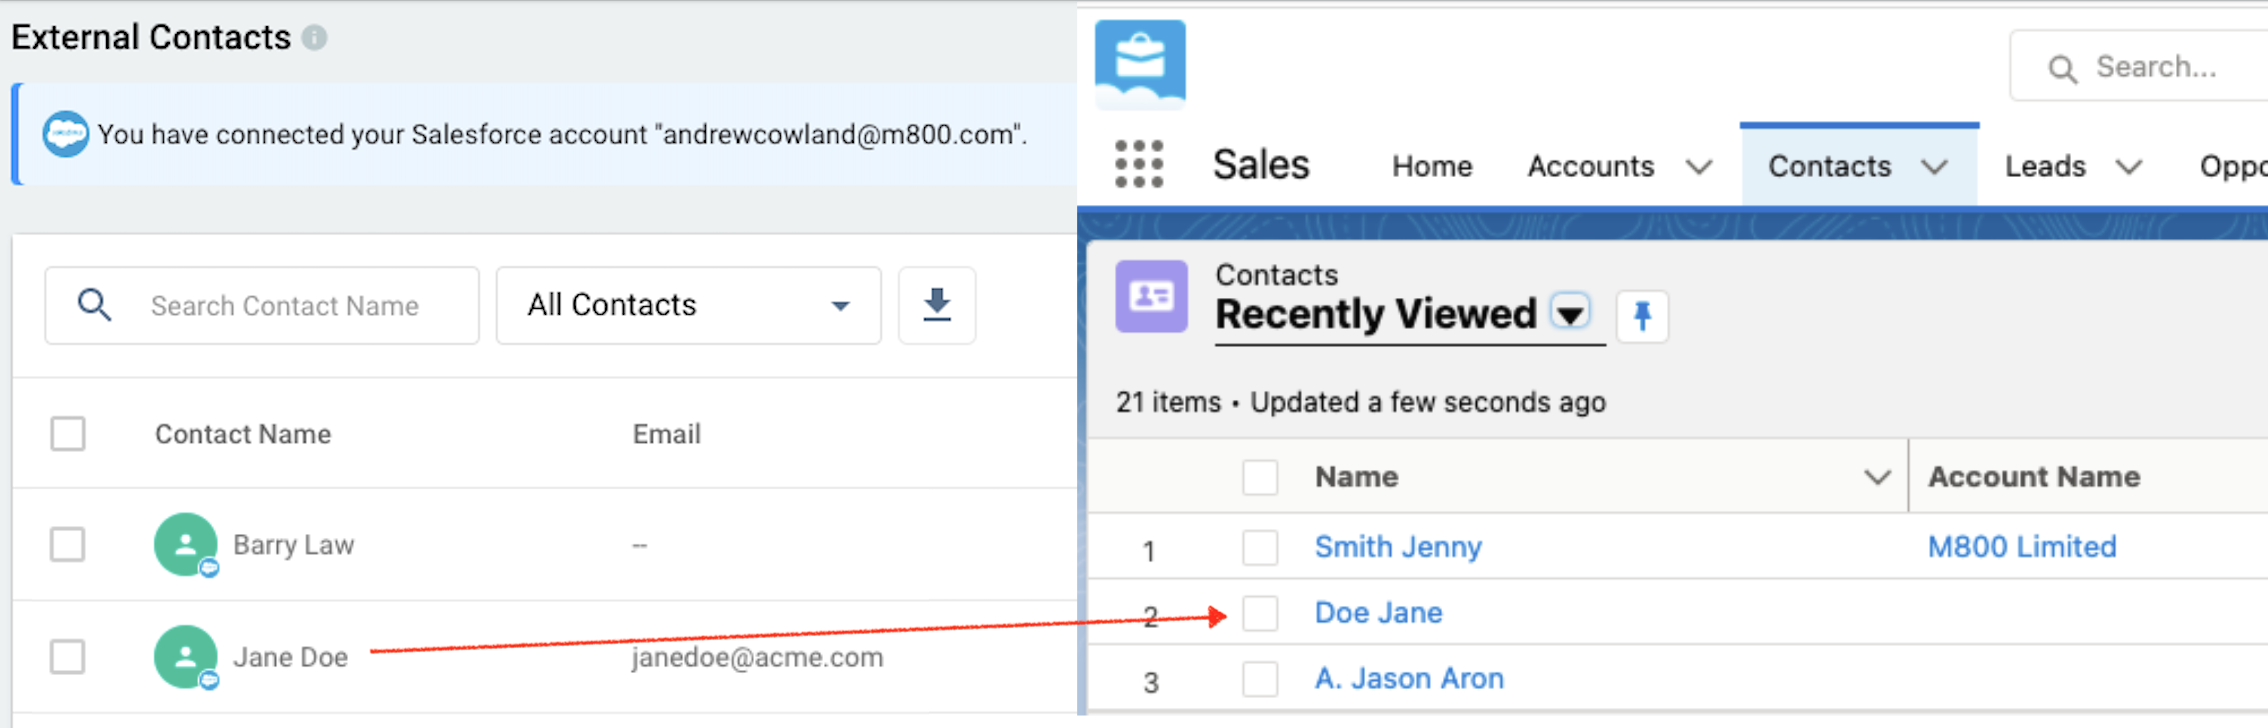 Newly created contact in CINNOX, synced in Salesforce